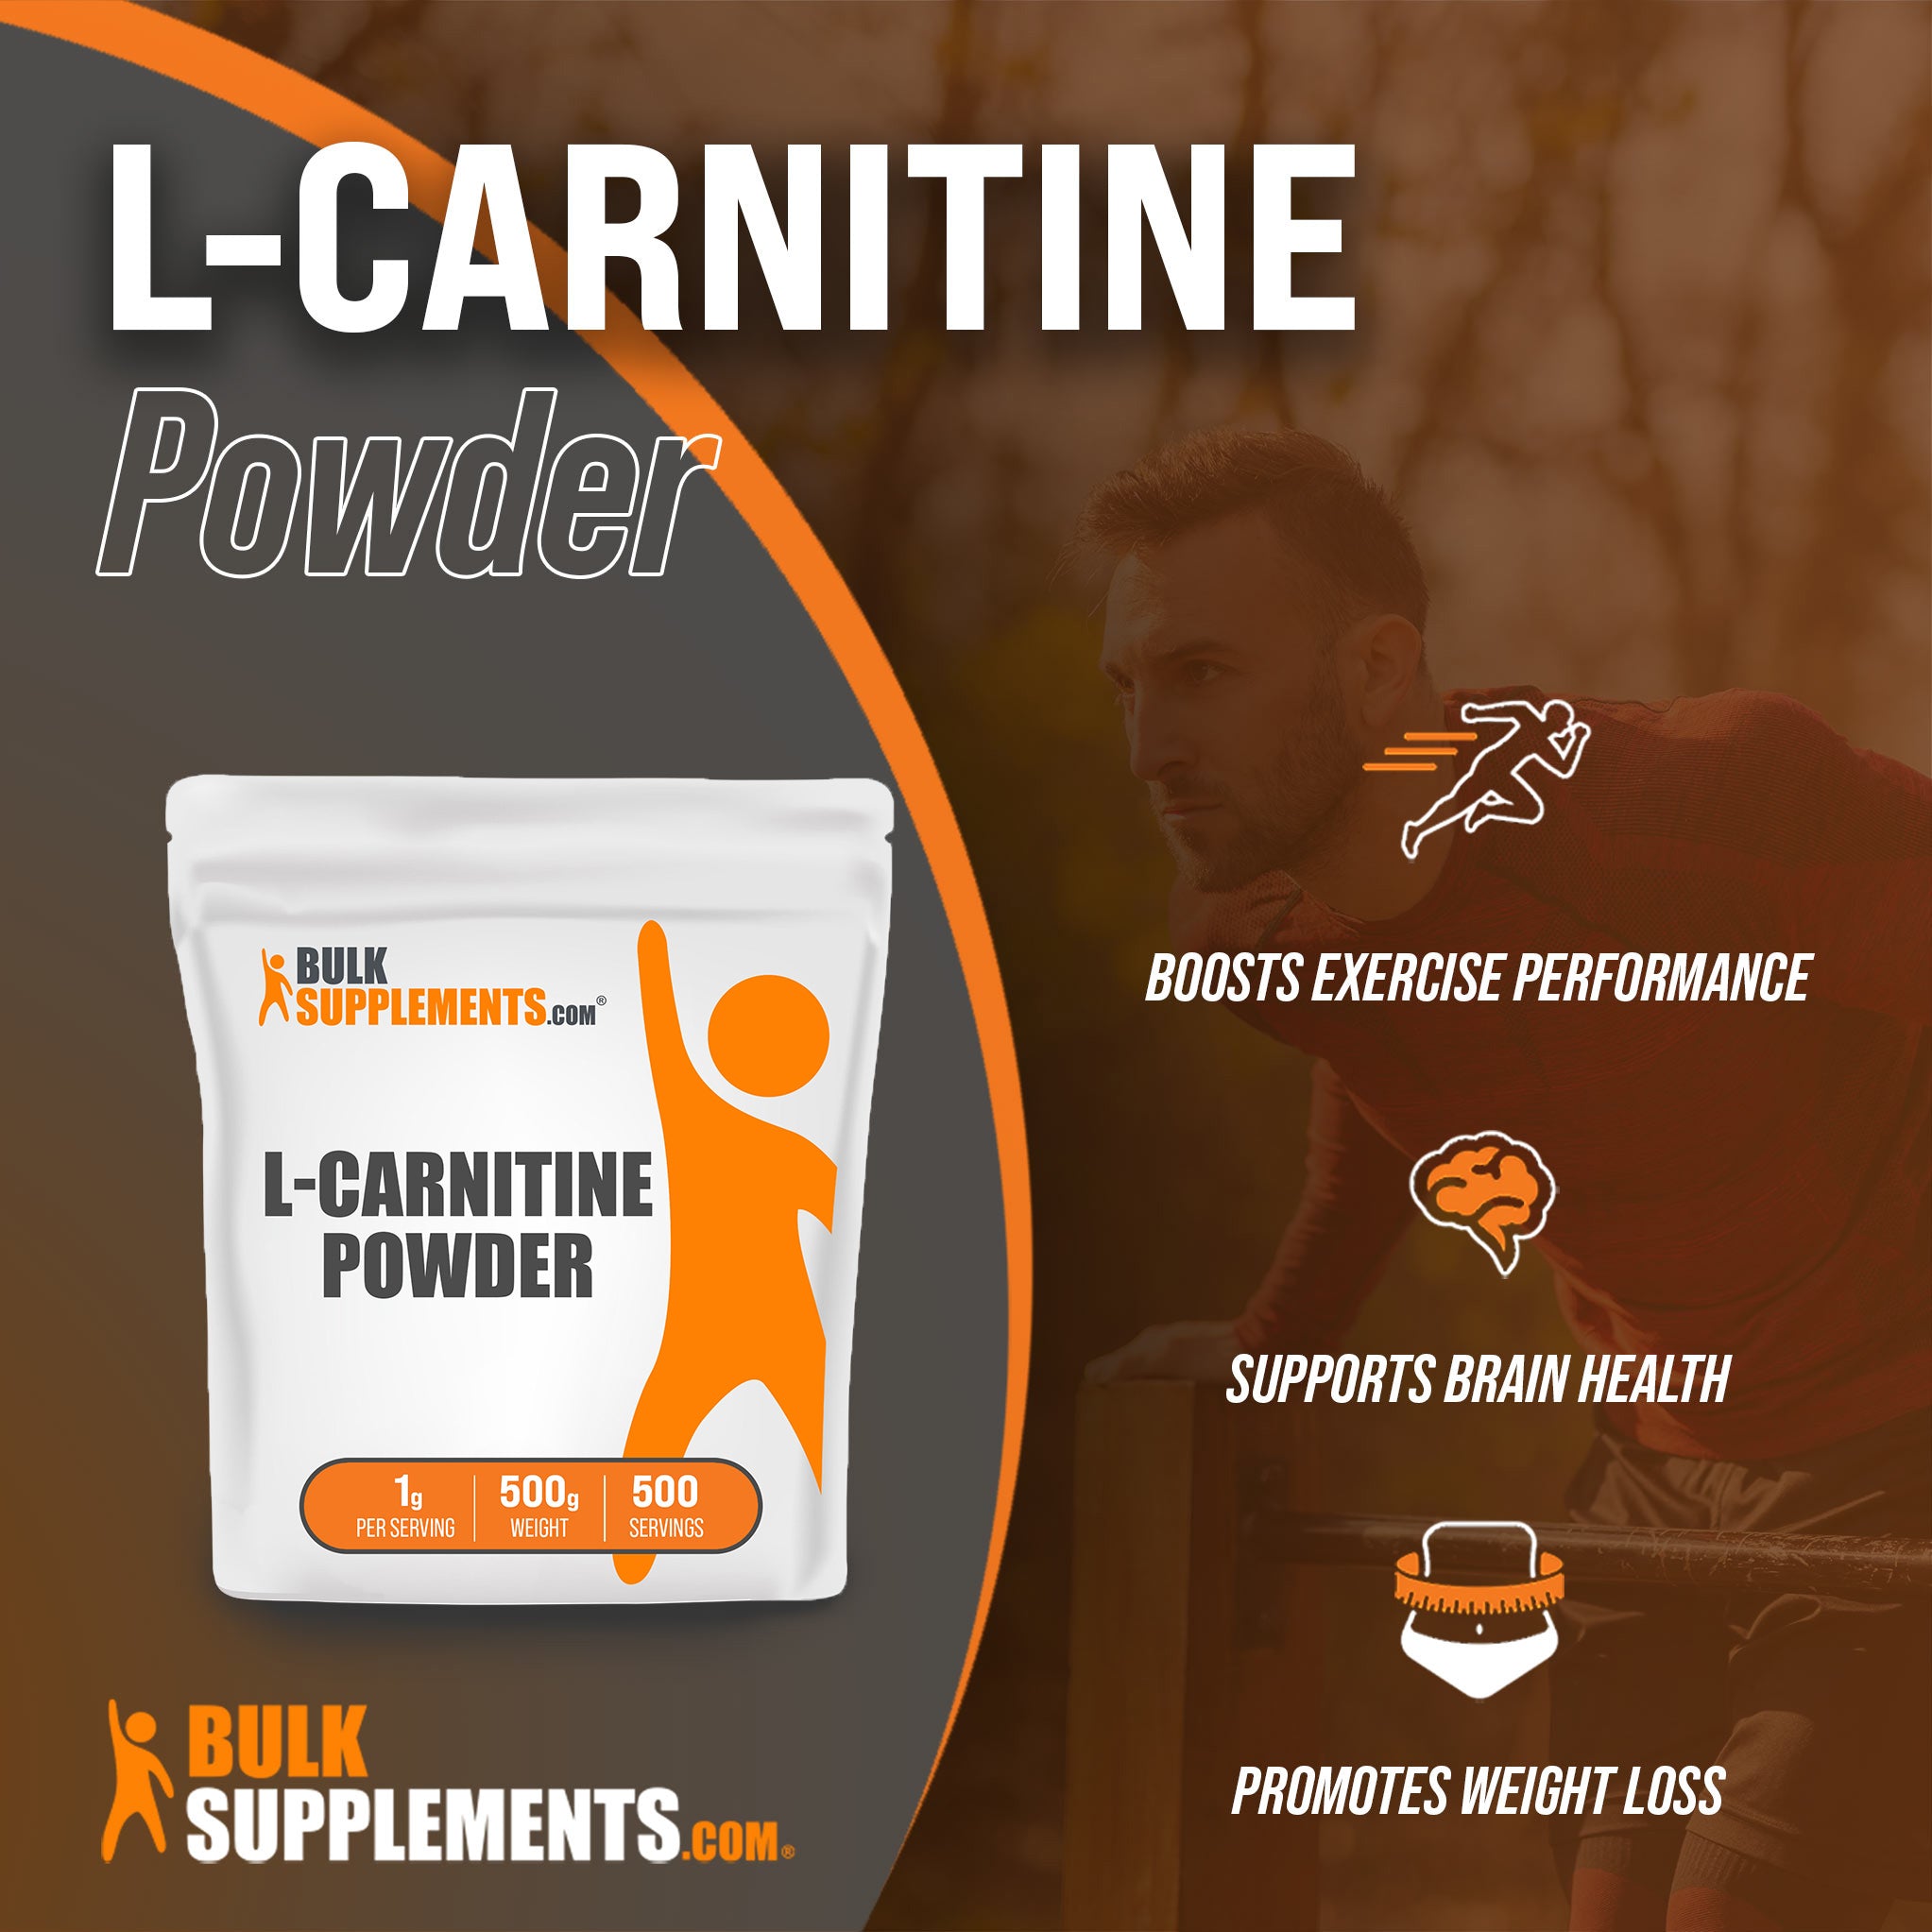 Benefits of L-Carnitine; boosts exercise performance, supports brain health, promotes weight loss